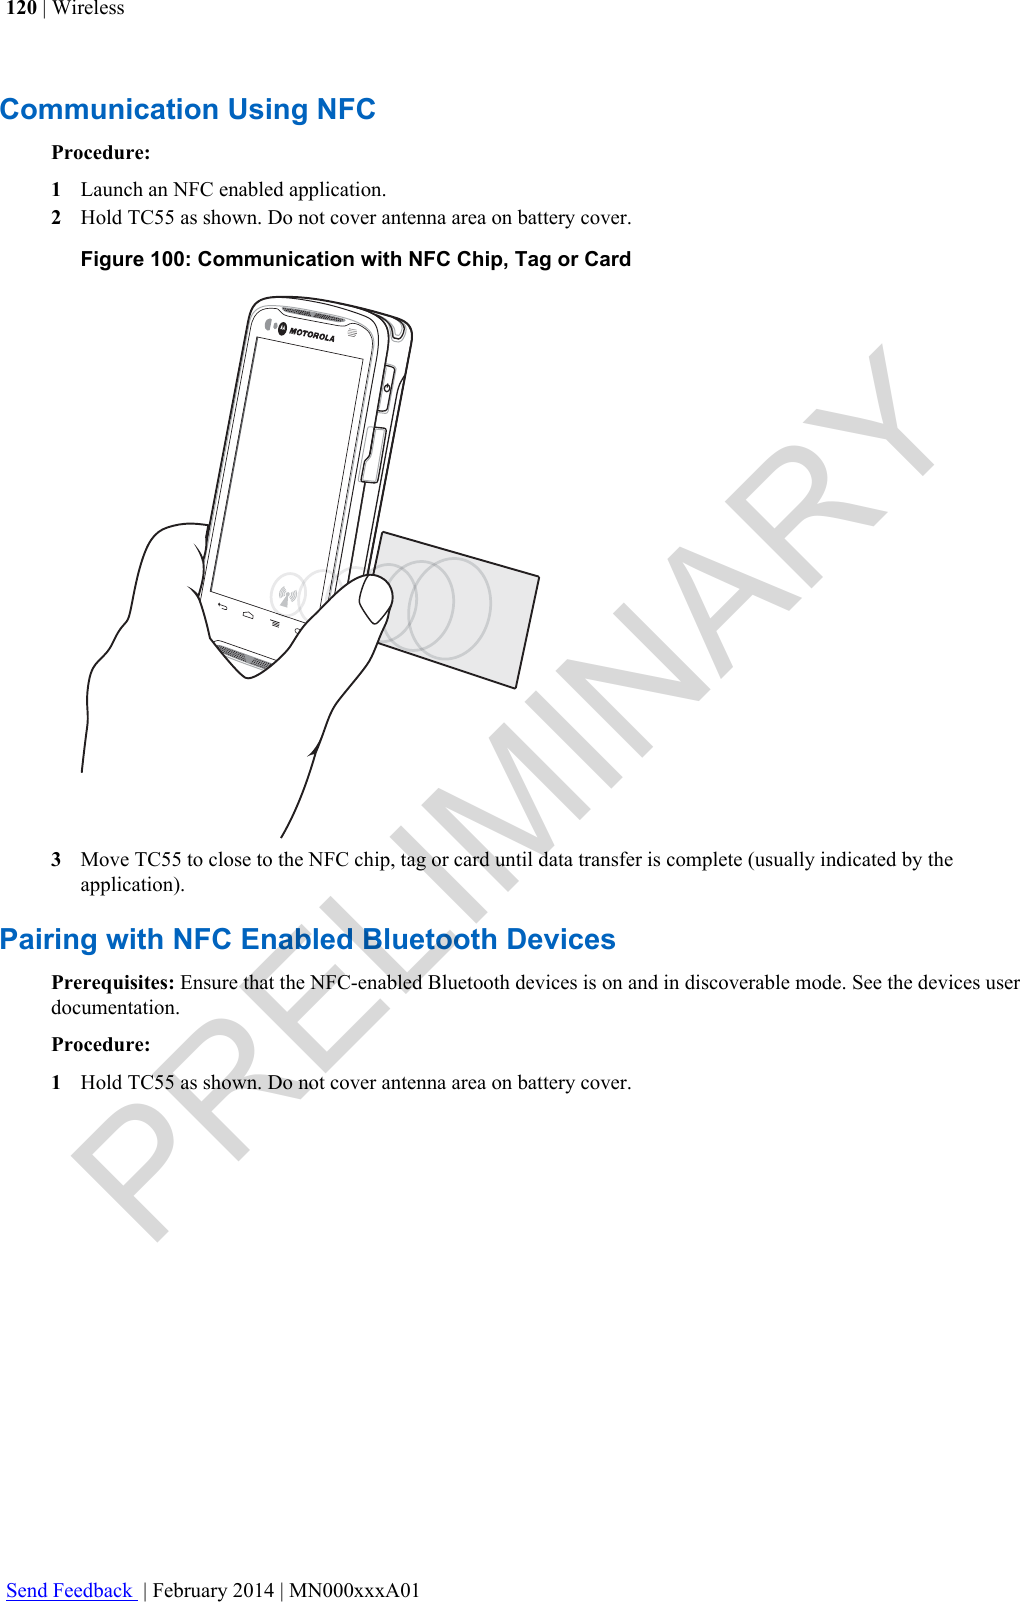 Communication Using NFCProcedure:1Launch an NFC enabled application.2Hold TC55 as shown. Do not cover antenna area on battery cover.Figure 100: Communication with NFC Chip, Tag or Card3Move TC55 to close to the NFC chip, tag or card until data transfer is complete (usually indicated by theapplication).Pairing with NFC Enabled Bluetooth DevicesPrerequisites: Ensure that the NFC-enabled Bluetooth devices is on and in discoverable mode. See the devices userdocumentation.Procedure:1Hold TC55 as shown. Do not cover antenna area on battery cover.120 | WirelessSend Feedback  | February 2014 | MN000xxxA01PRELIMINARY